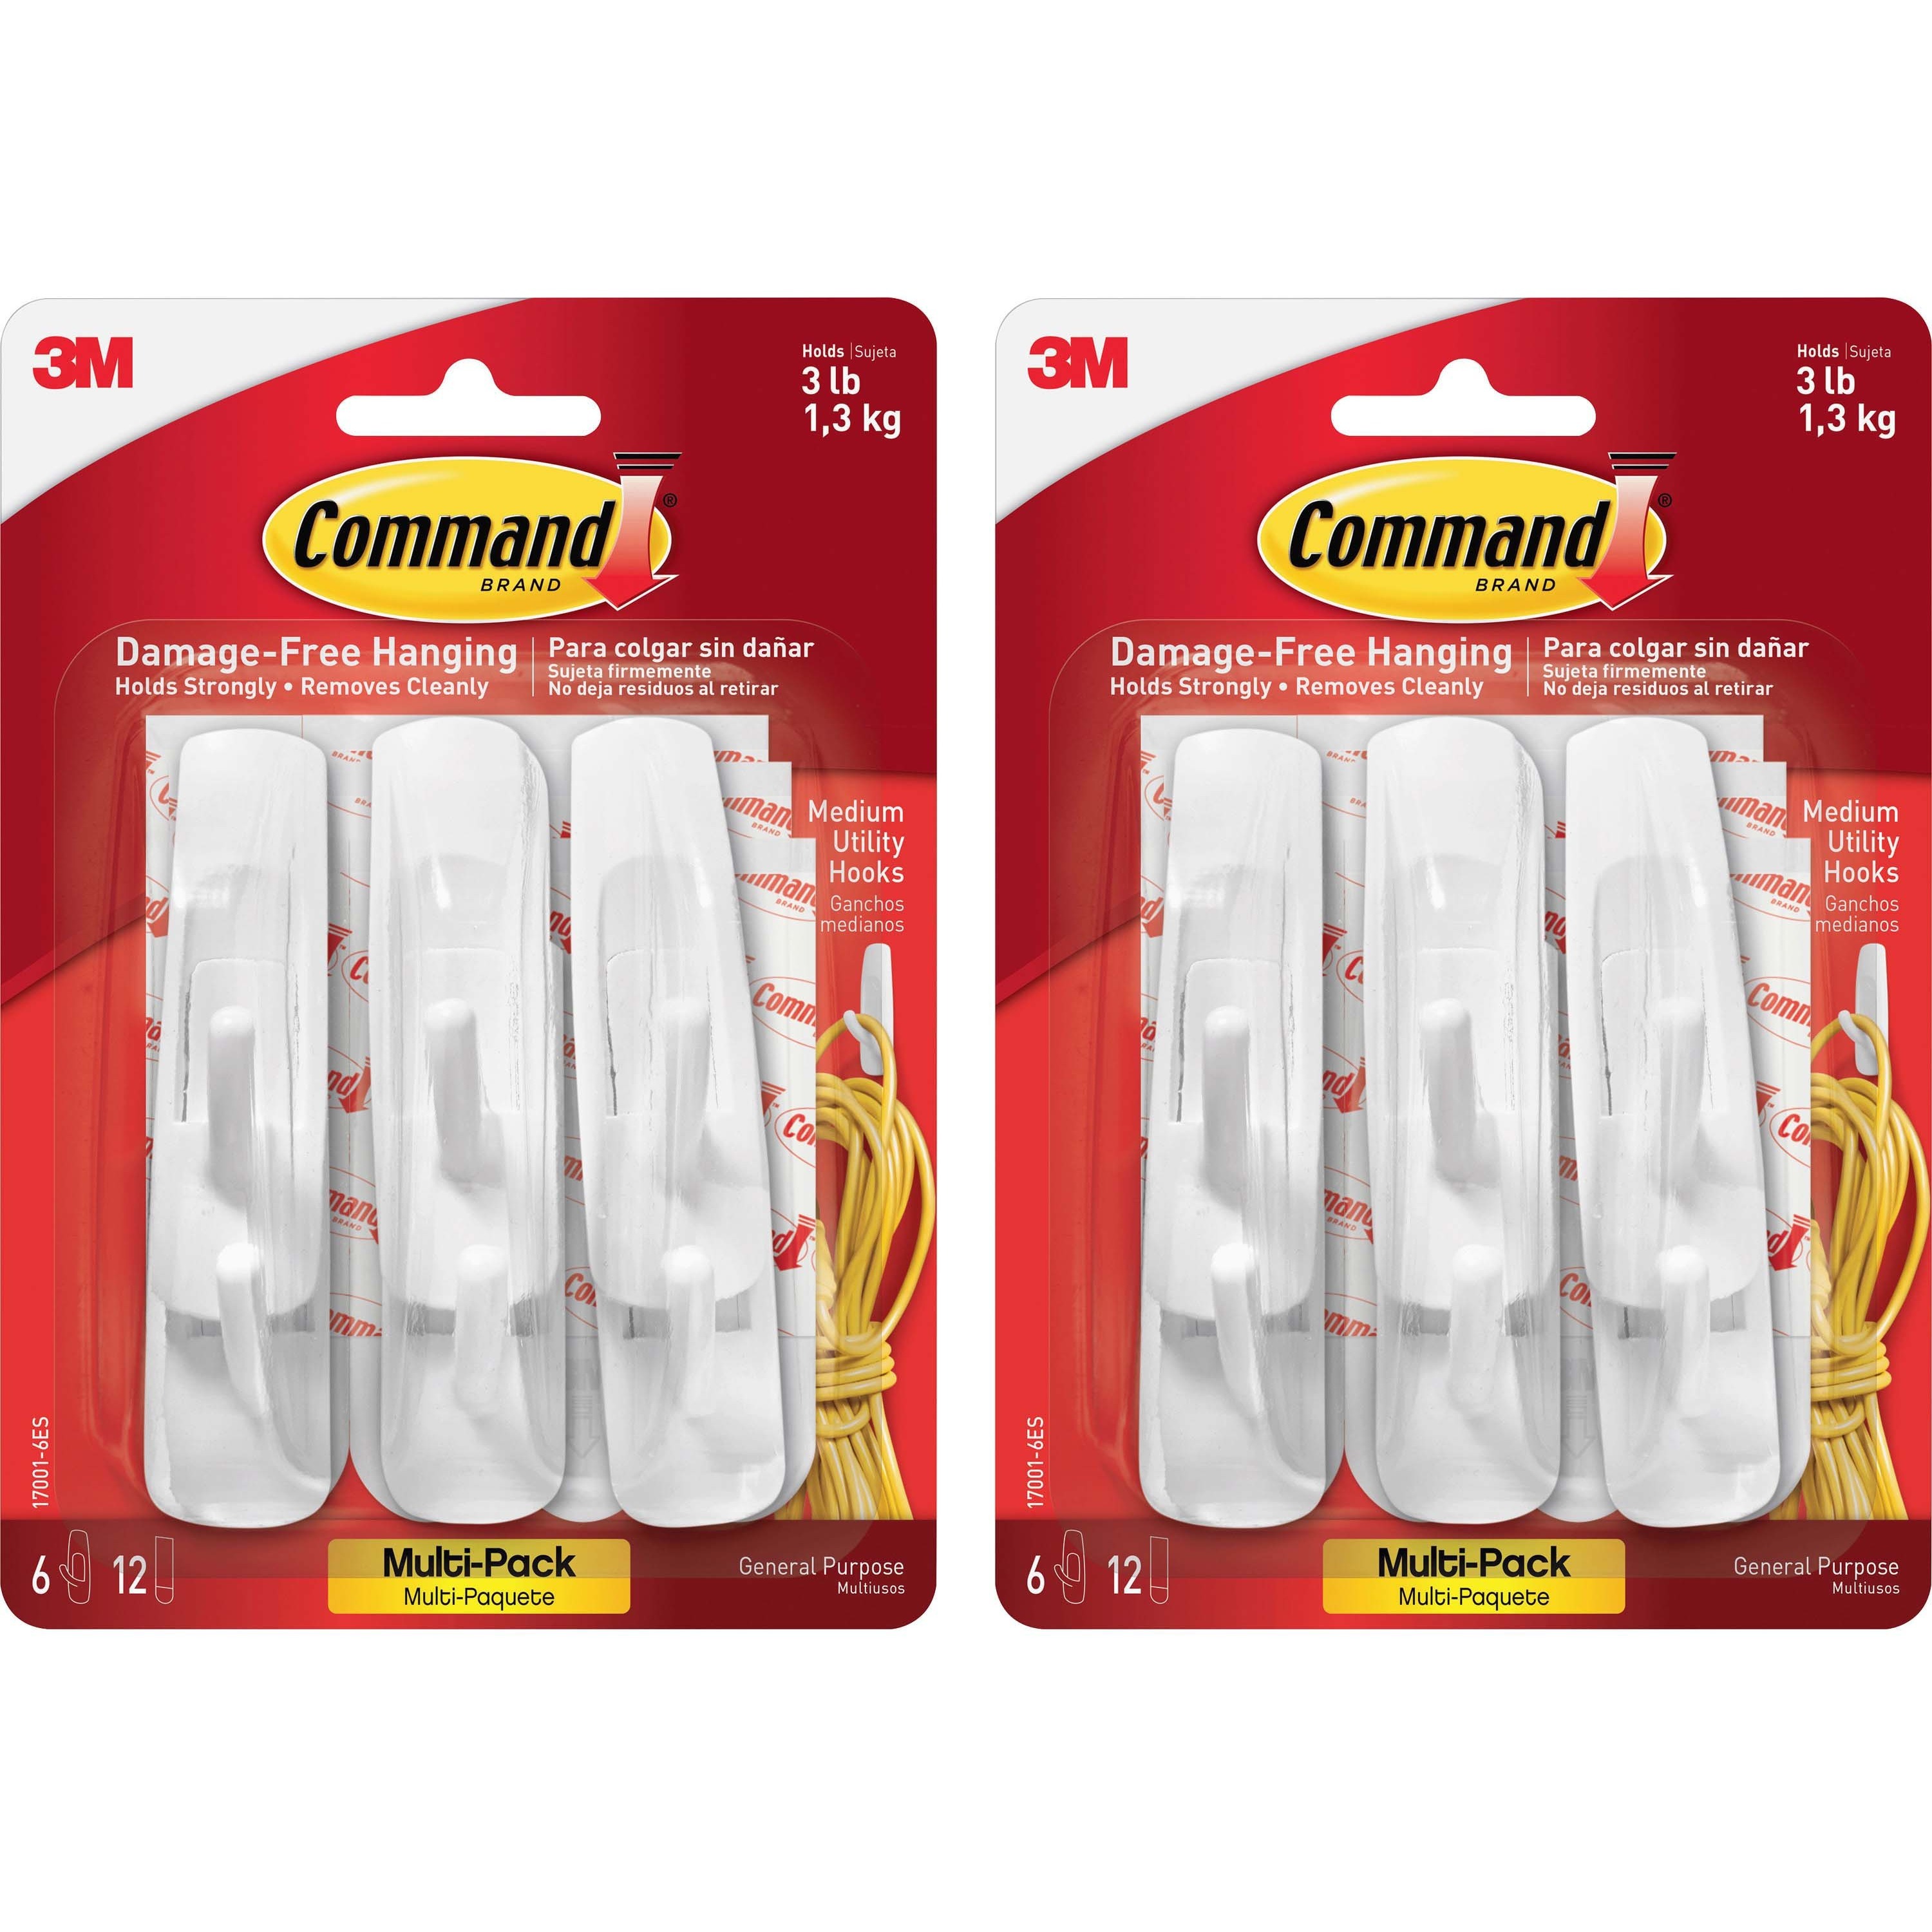 3M Command Clear Large Organiser Cord Clip with Strips - Hardware Specialist